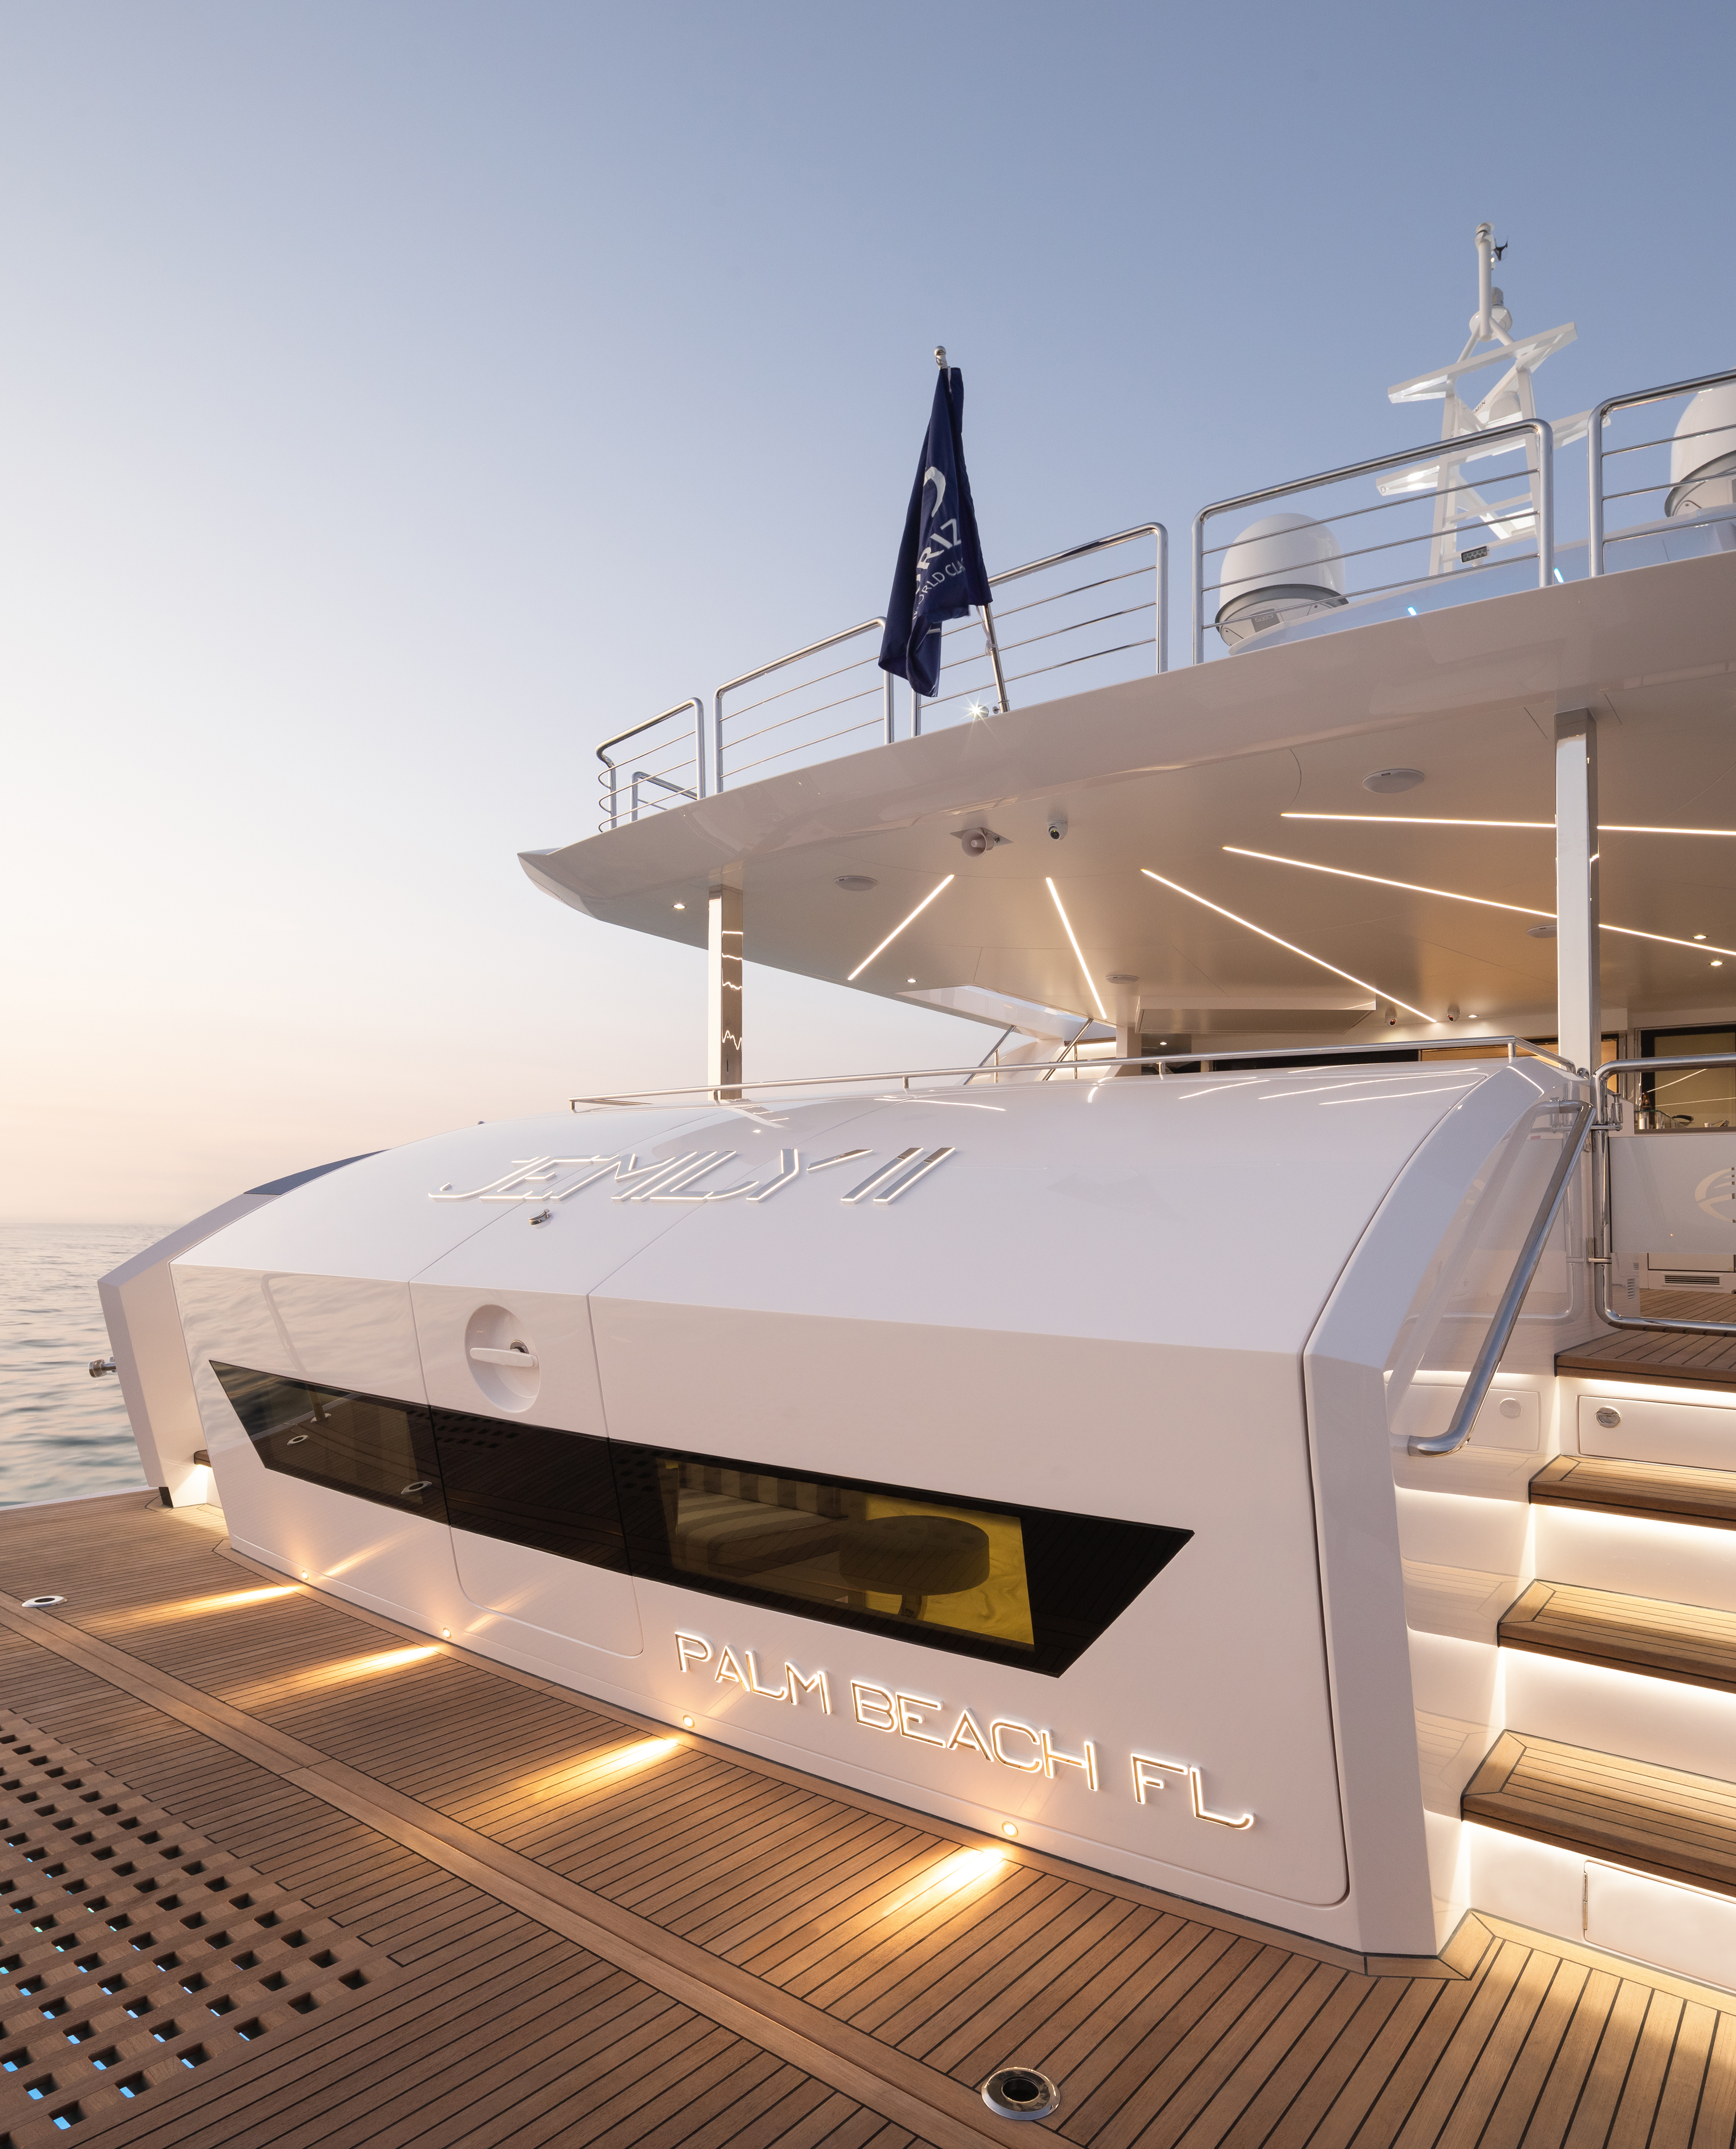 Starboard Inks The Ritz-Carlton Yacht Collection Deal - Cruise